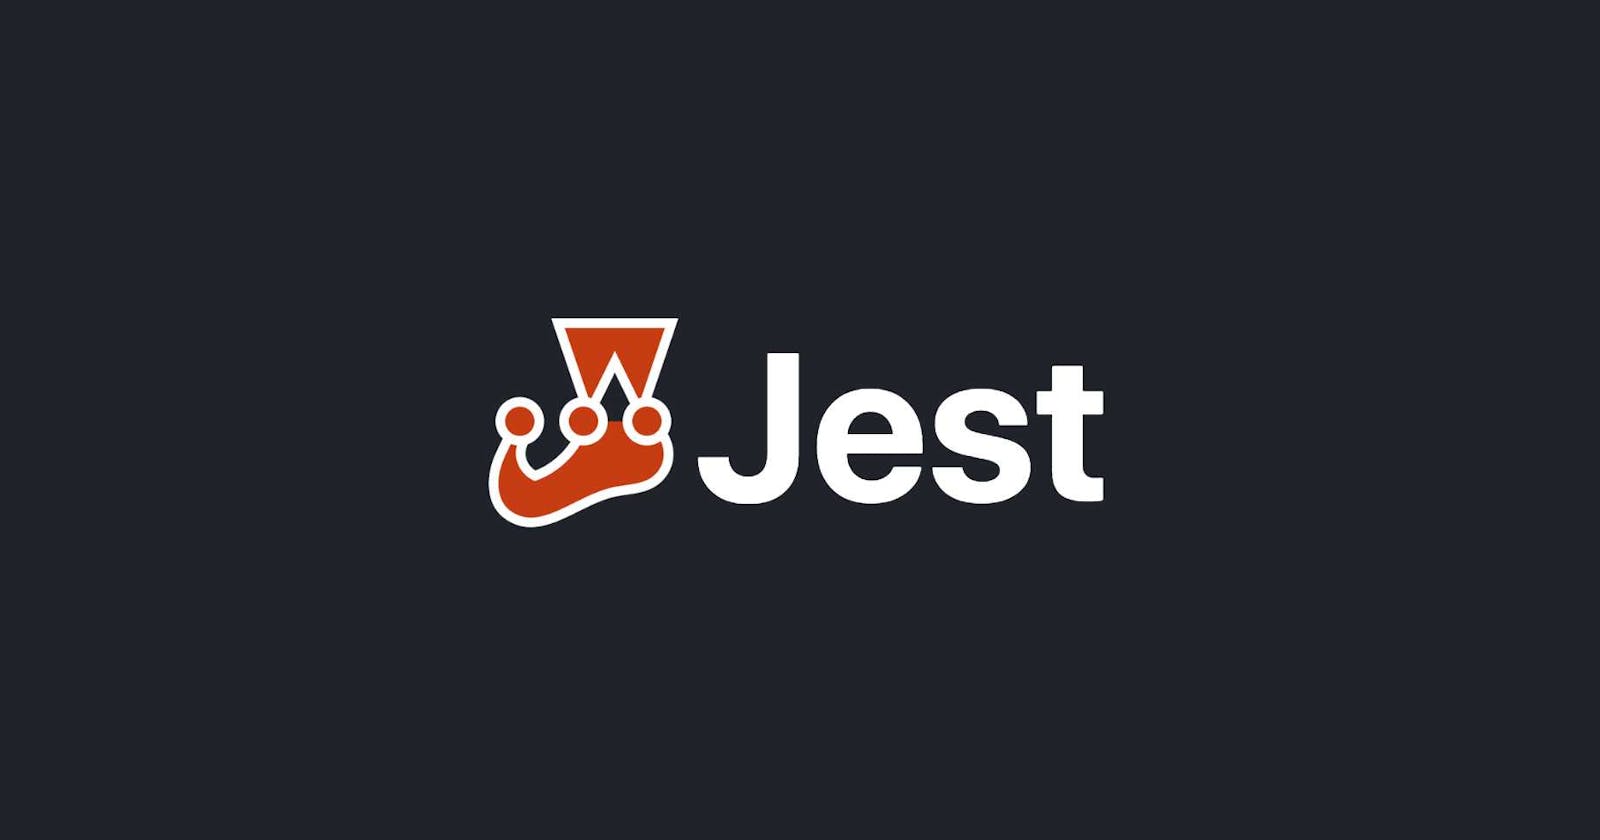 Navigating the JEST Memory Issue - My Workaround